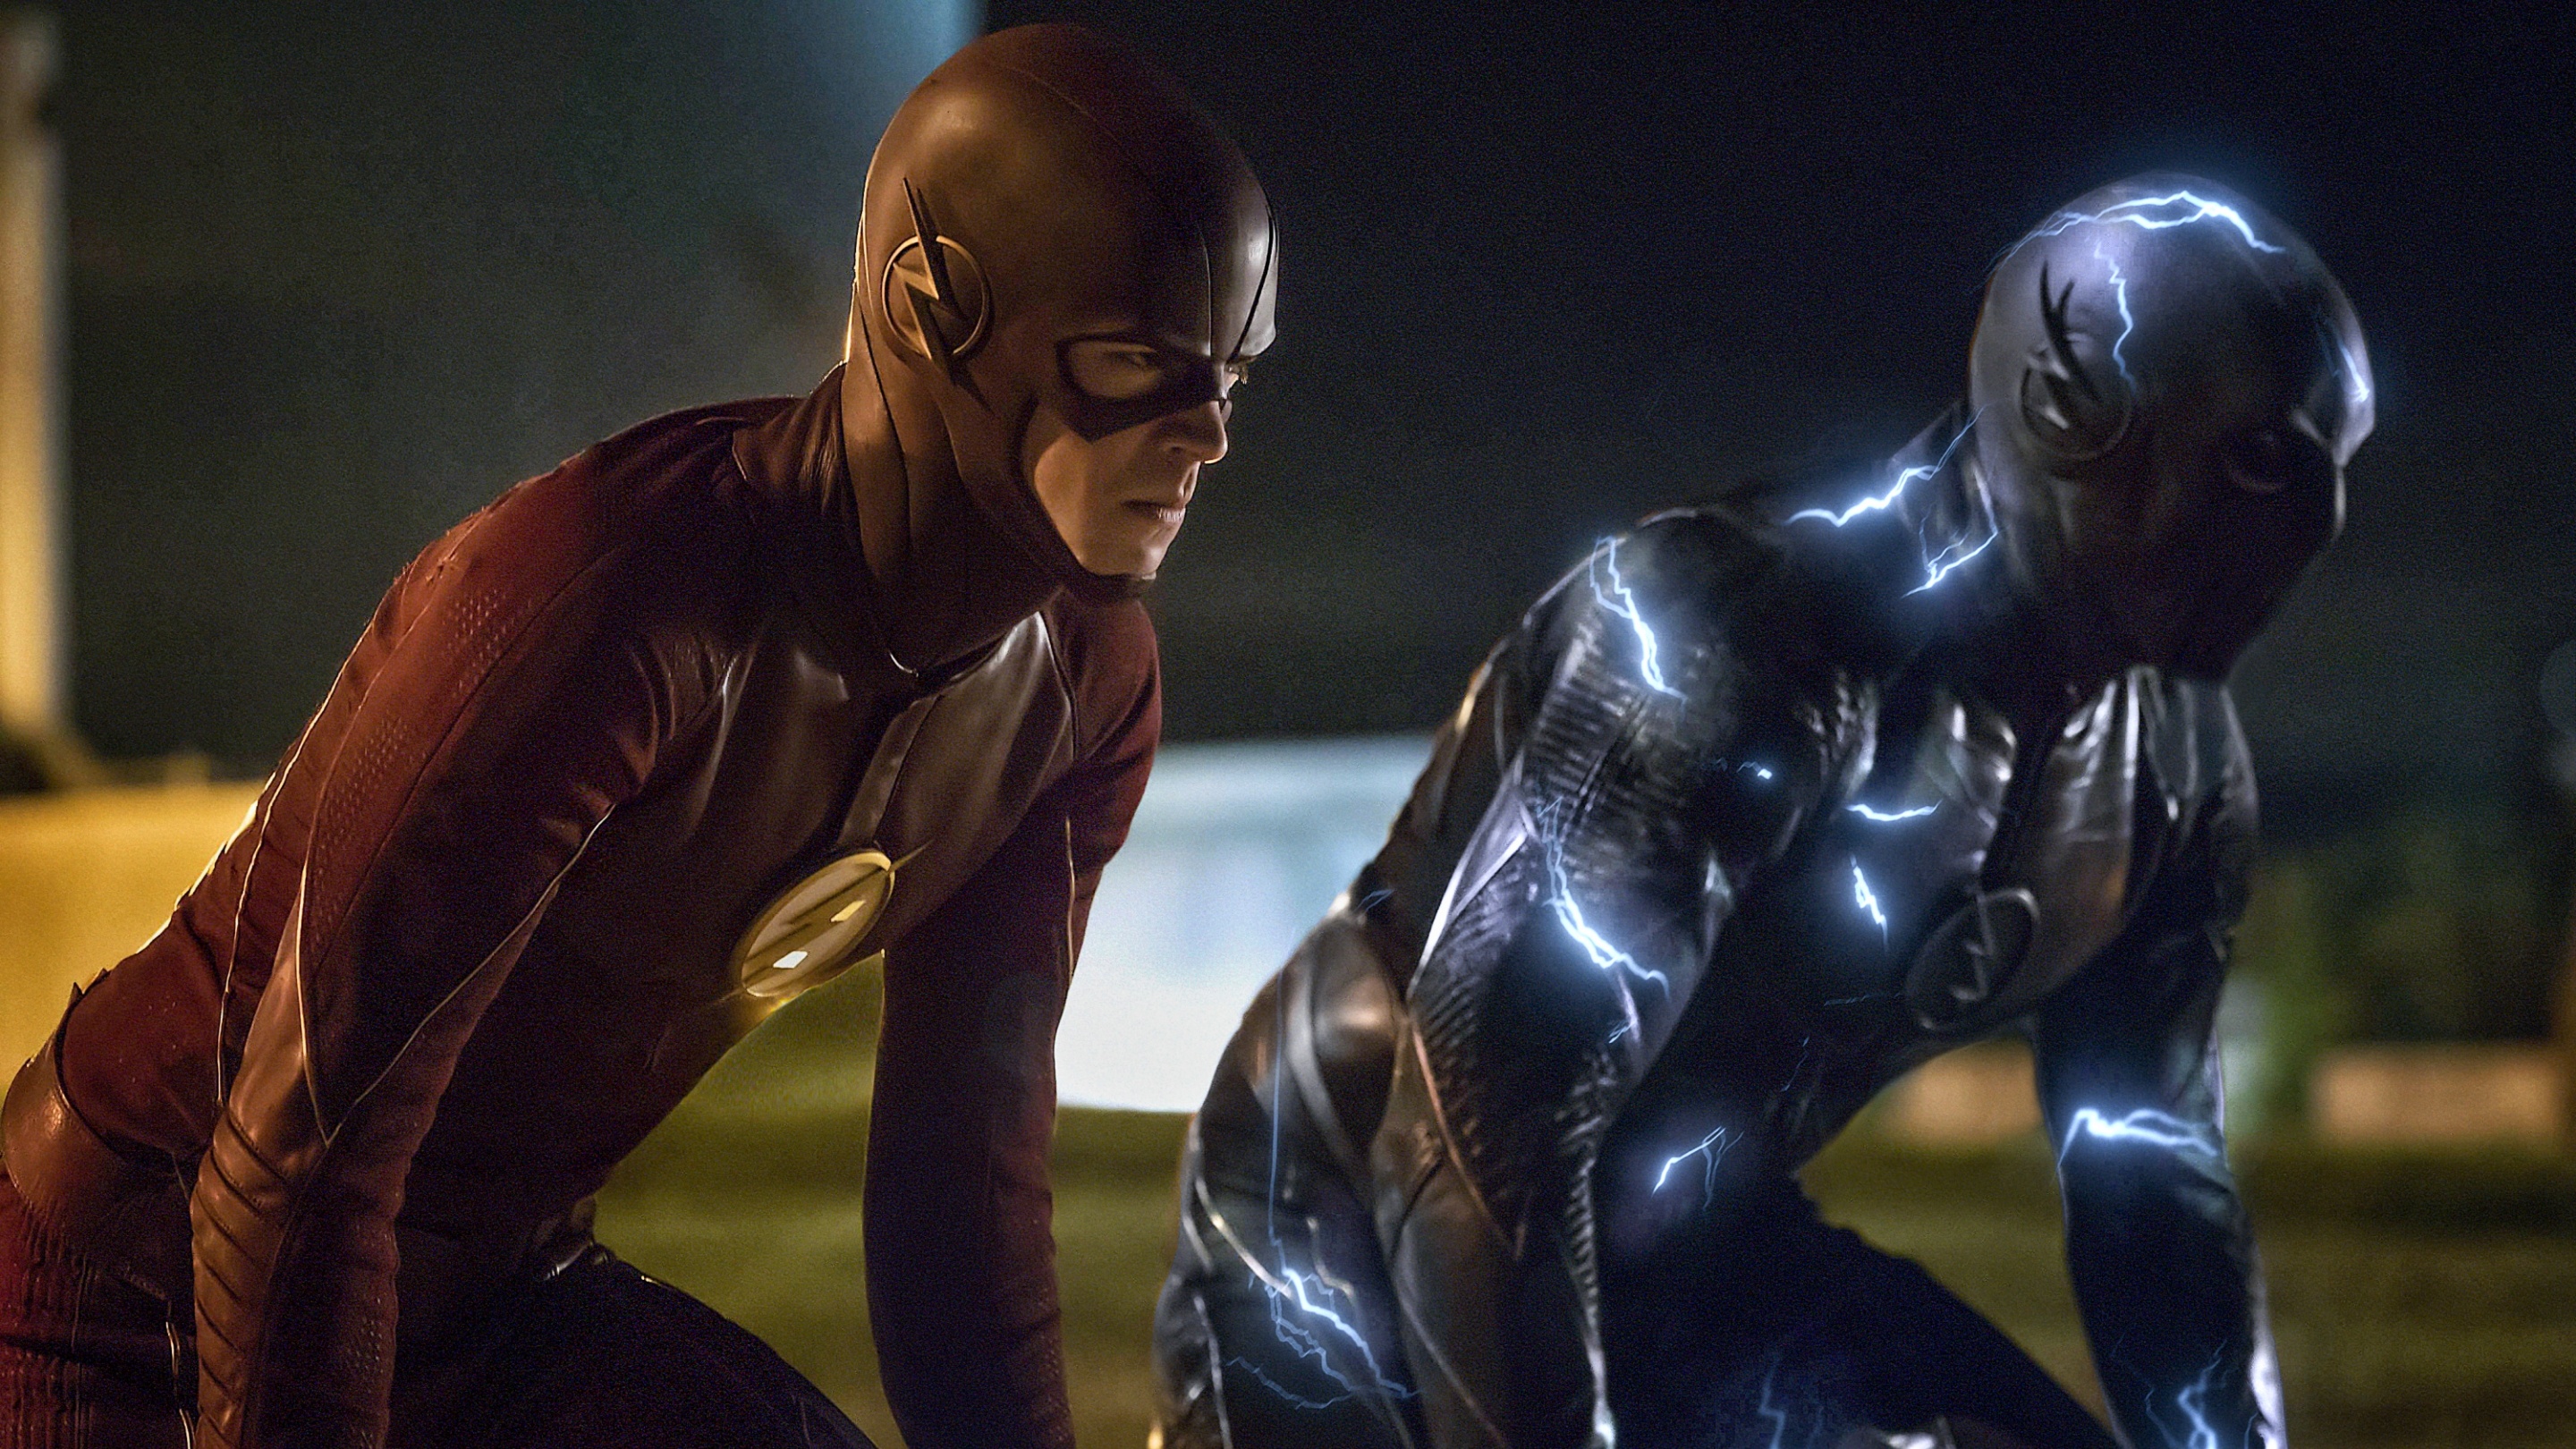 The Flash Season 2 Finale Race Of His Life